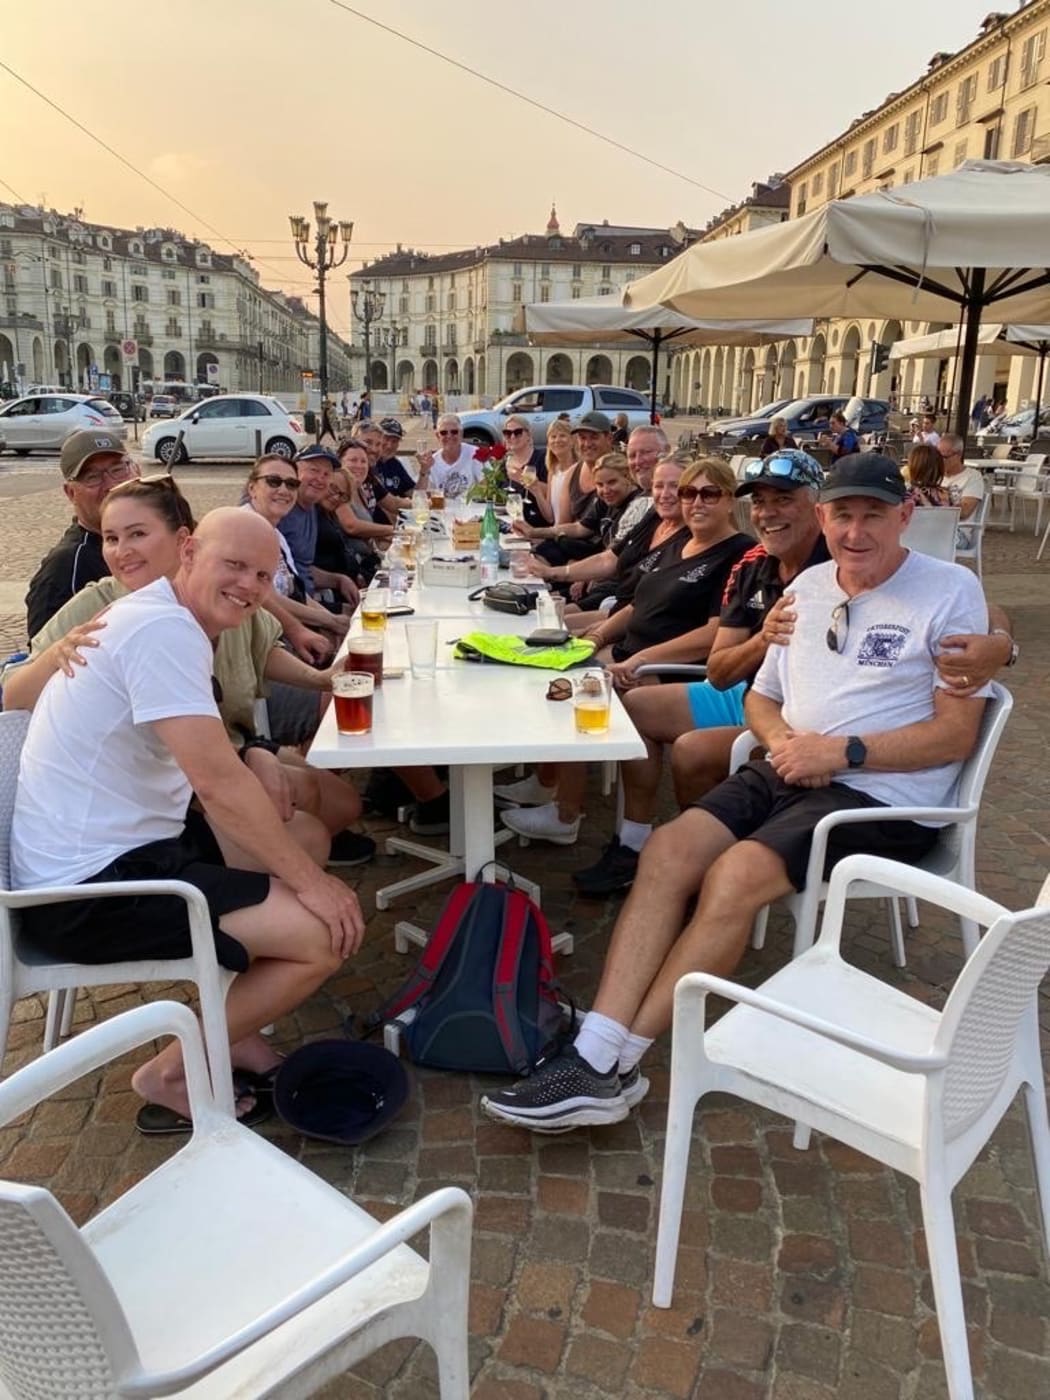 A group drinks in Italy after a big bike tour of the city.